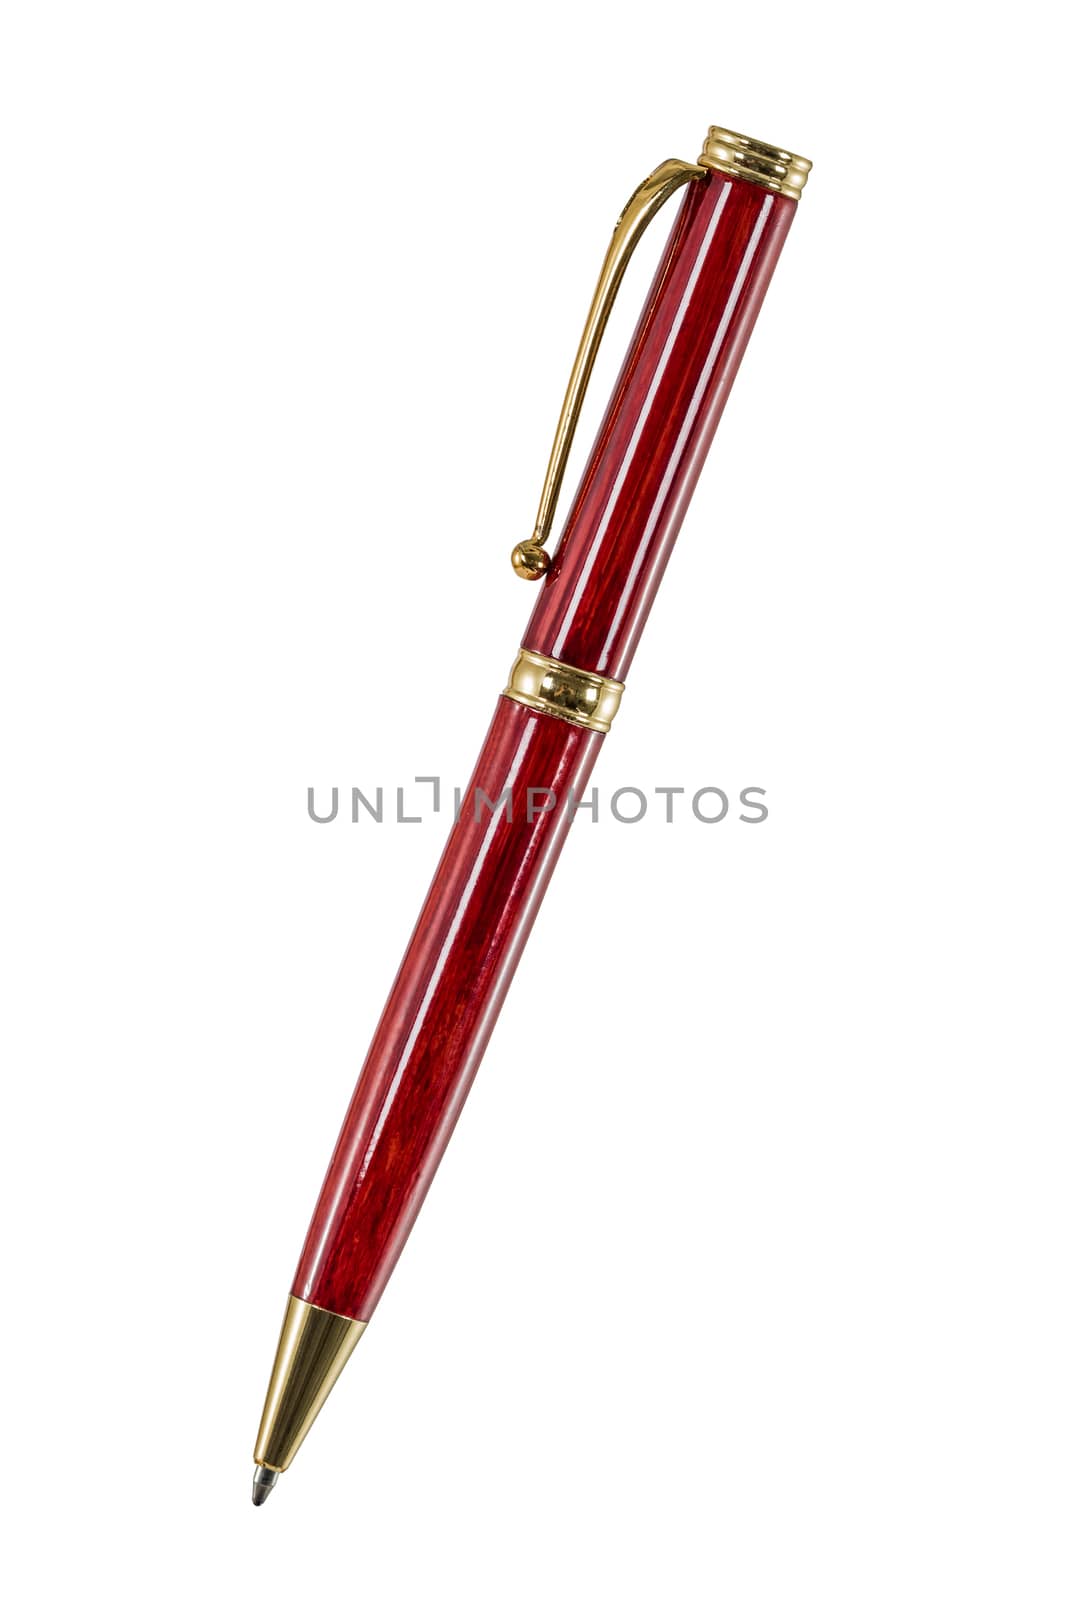 Pen, isolated on white background, with clipping path